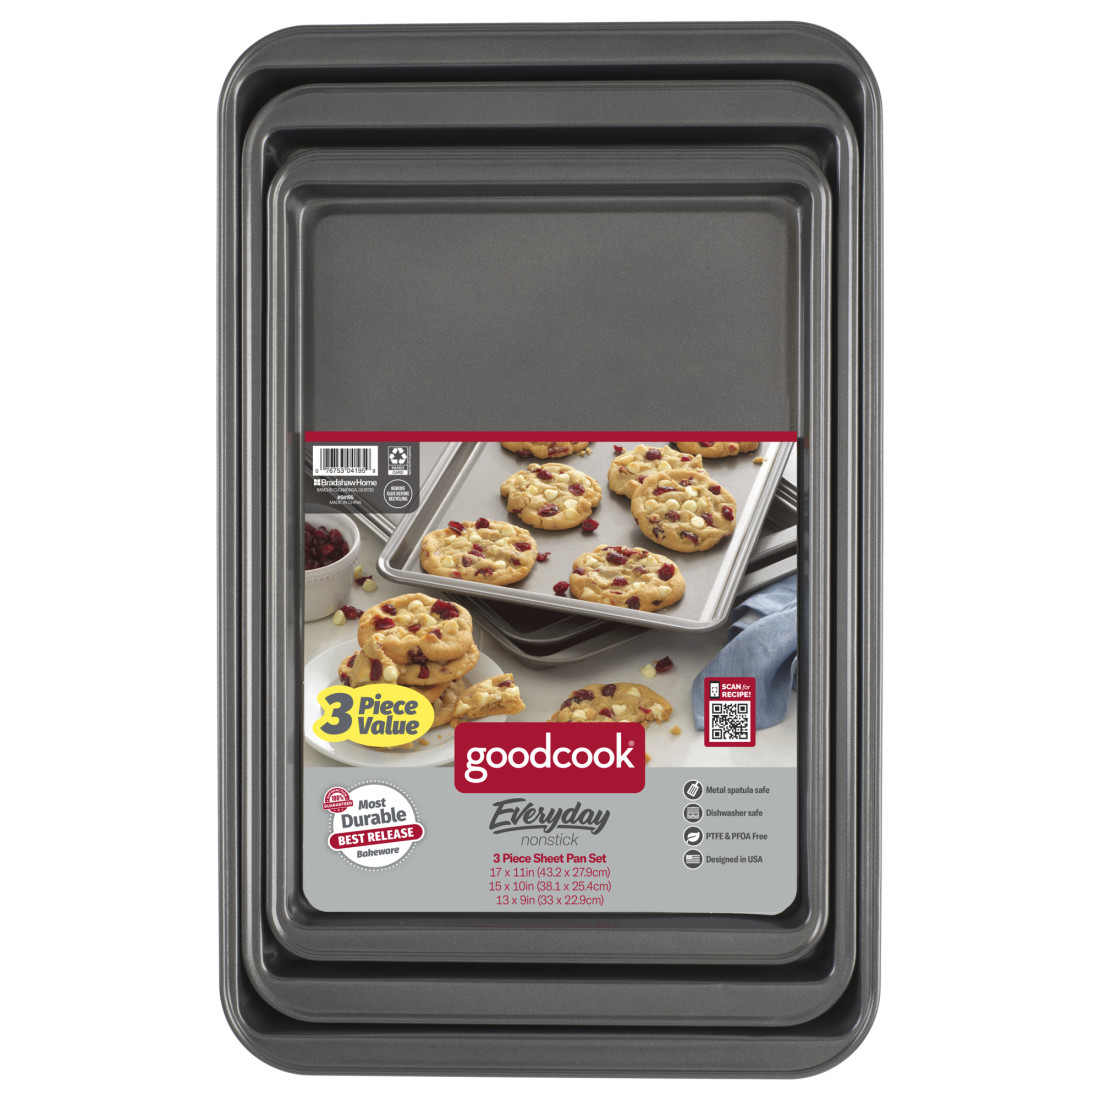 The Best Baking Sheets, Sheet Pans, and Cookie Sheets for Baking Cookies  and So Much More